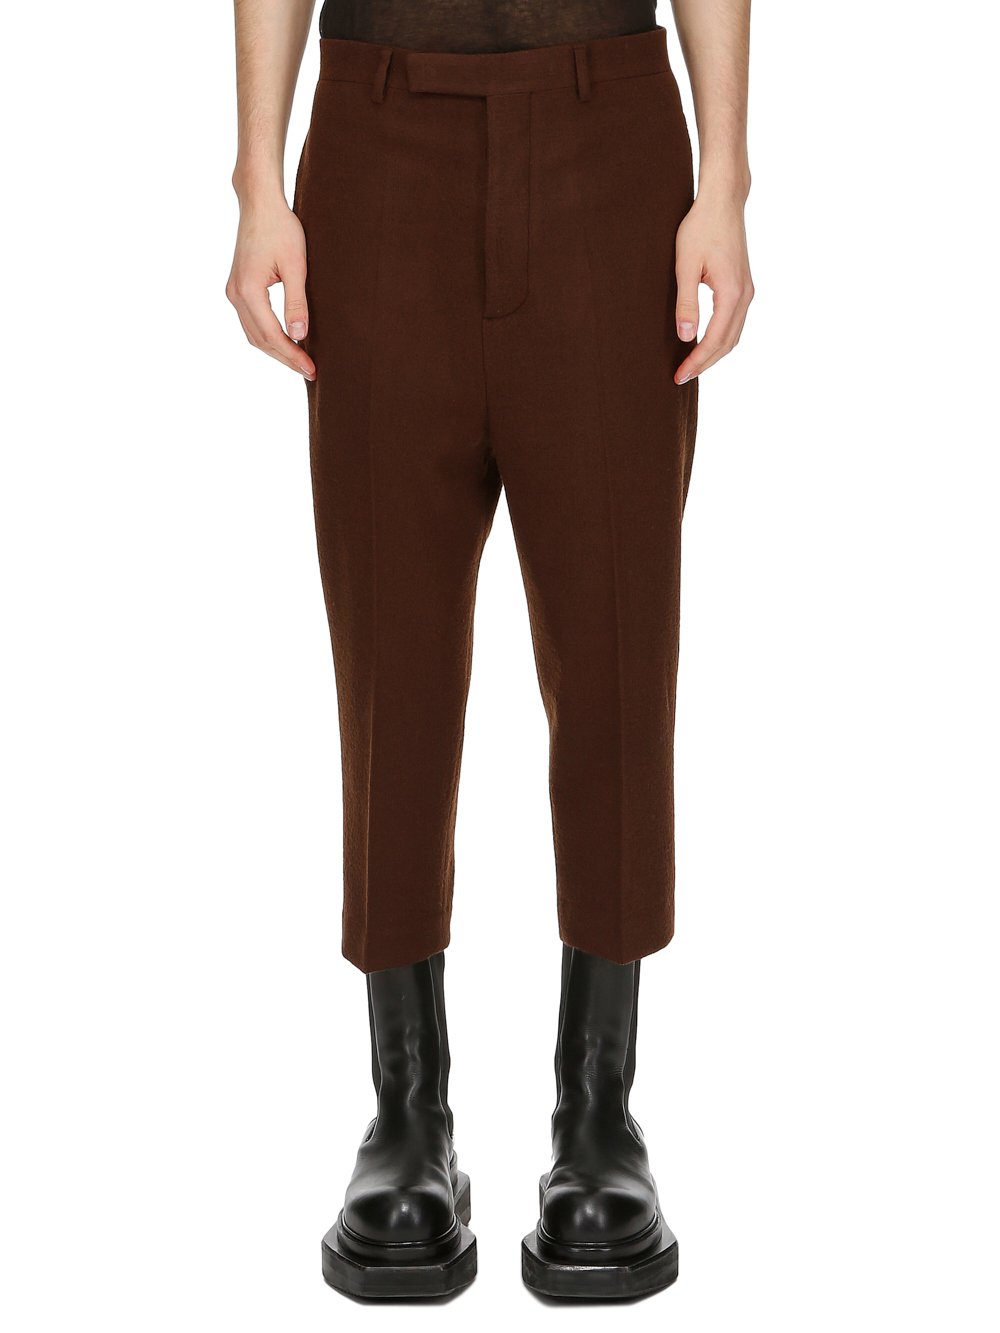 RICK OWENS FW23 LUXOR ASTAIRES CROPPED IN BROWN SOFT WOOL FLANNEL